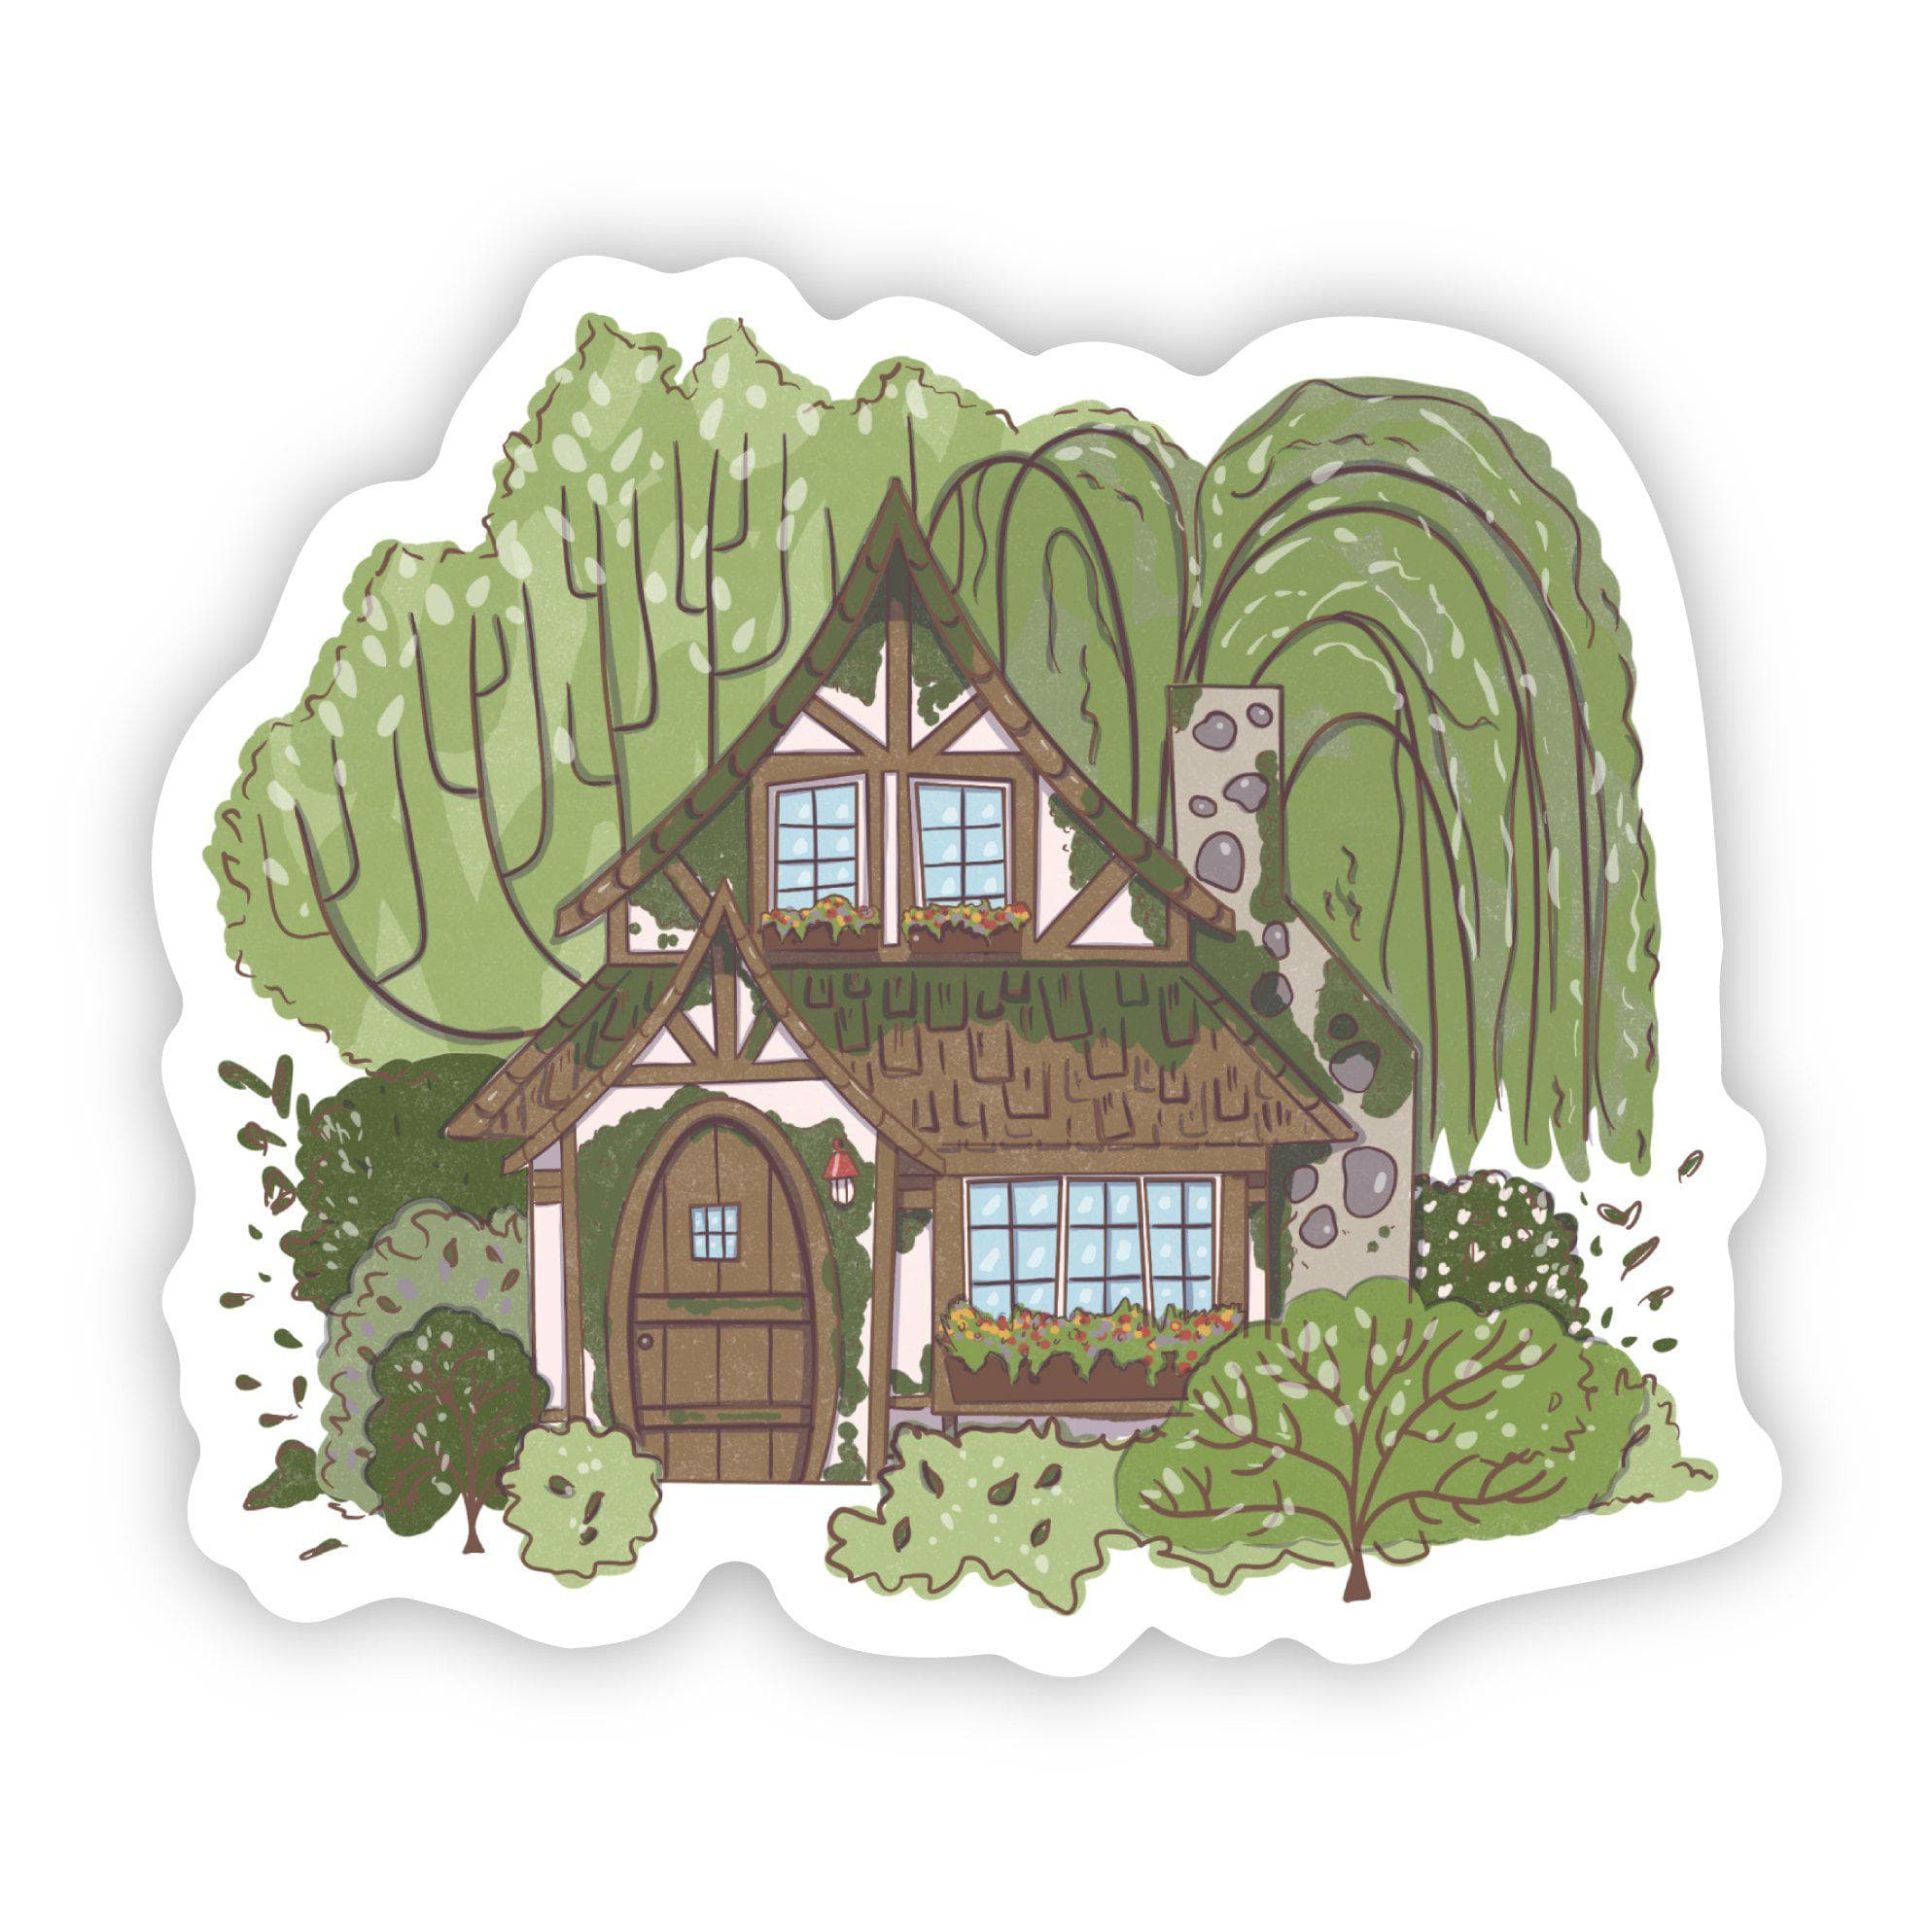 made some cottagecore stickers!! : r/cottagecore